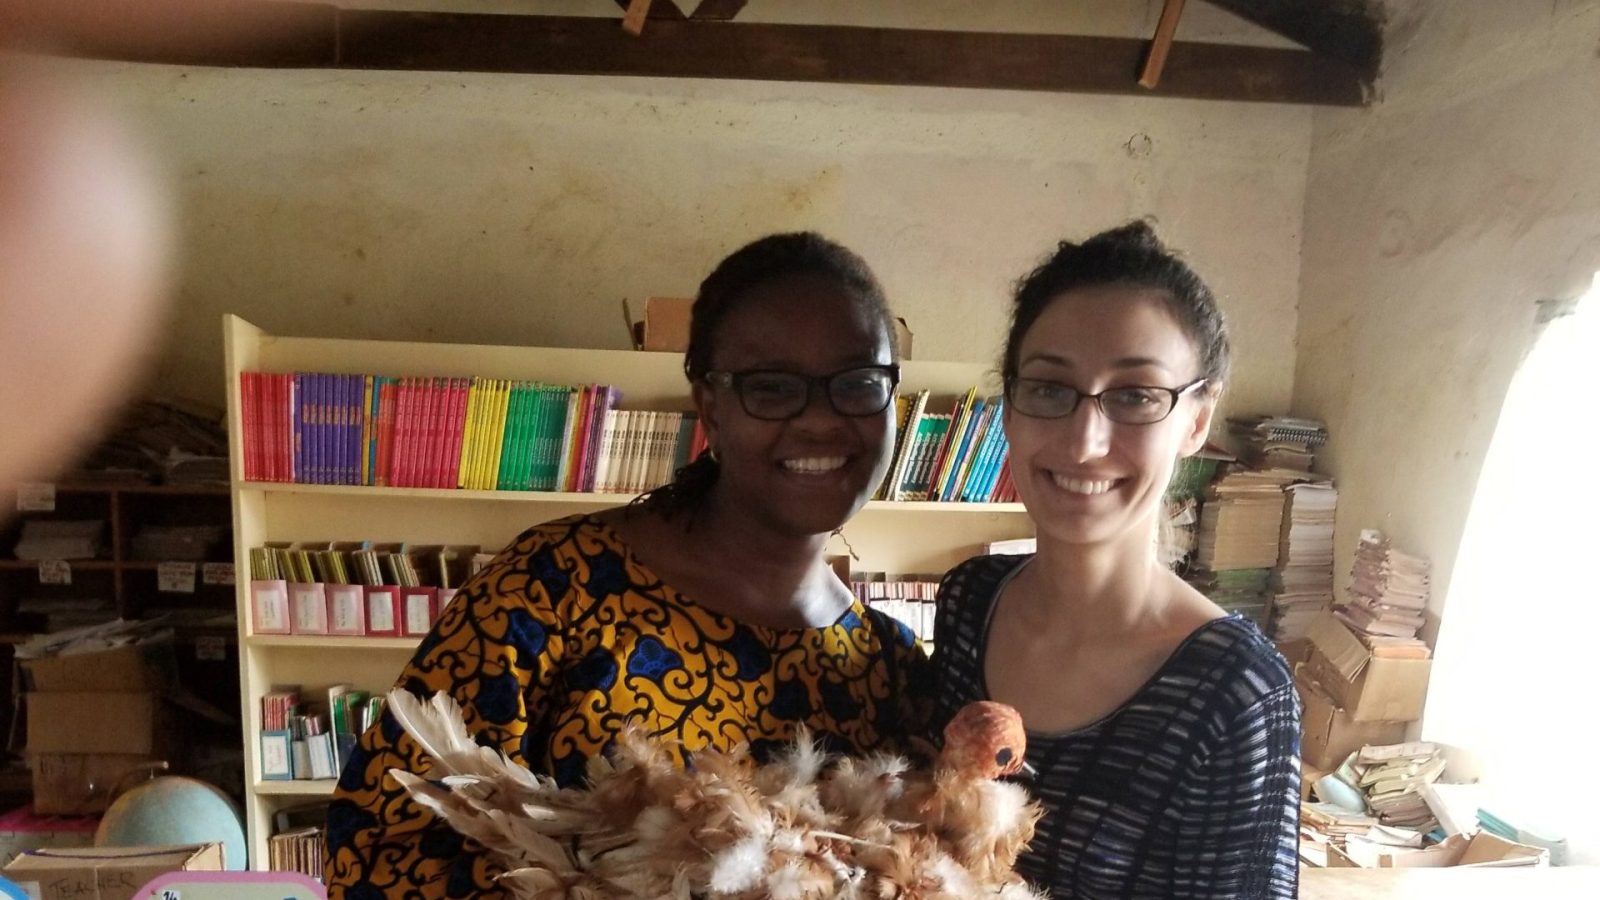 Foluyinka and her capstone partner standing in a schoolroom holding a crafted chicken